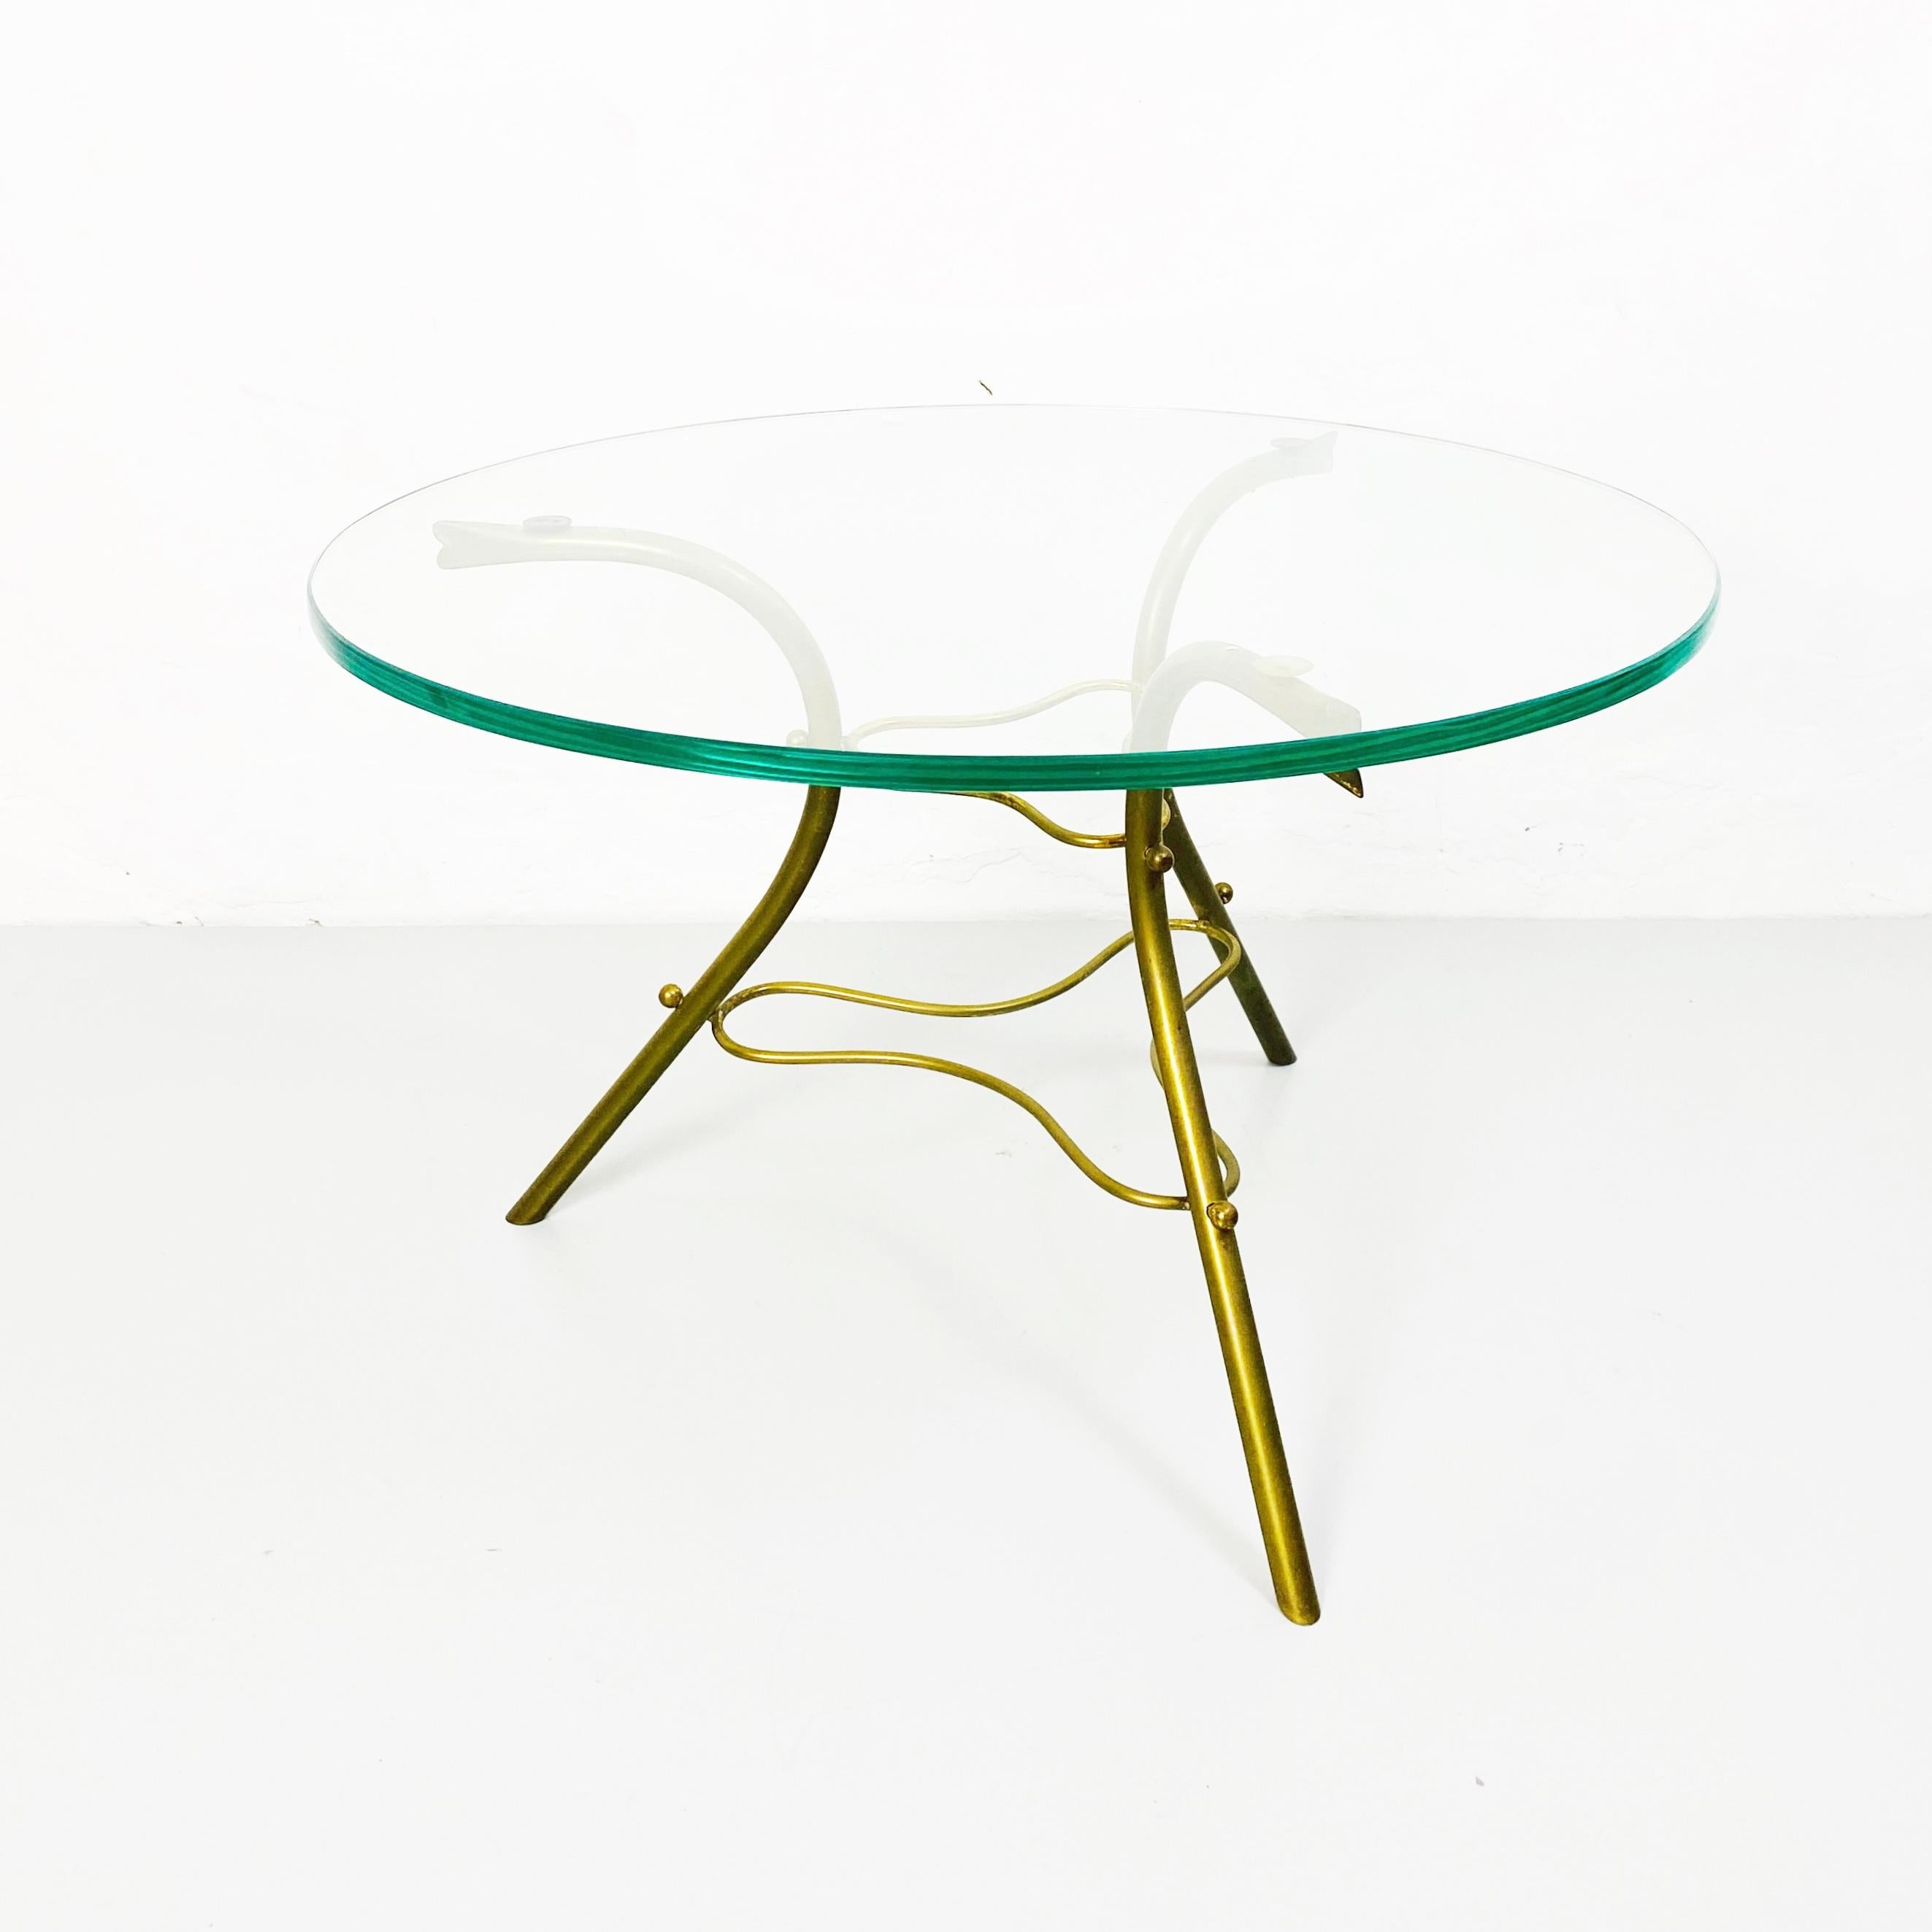 Mid-20th Century Italian Mid Century Round Coffee Table with Irregular Brass Road Base, 1950s For Sale